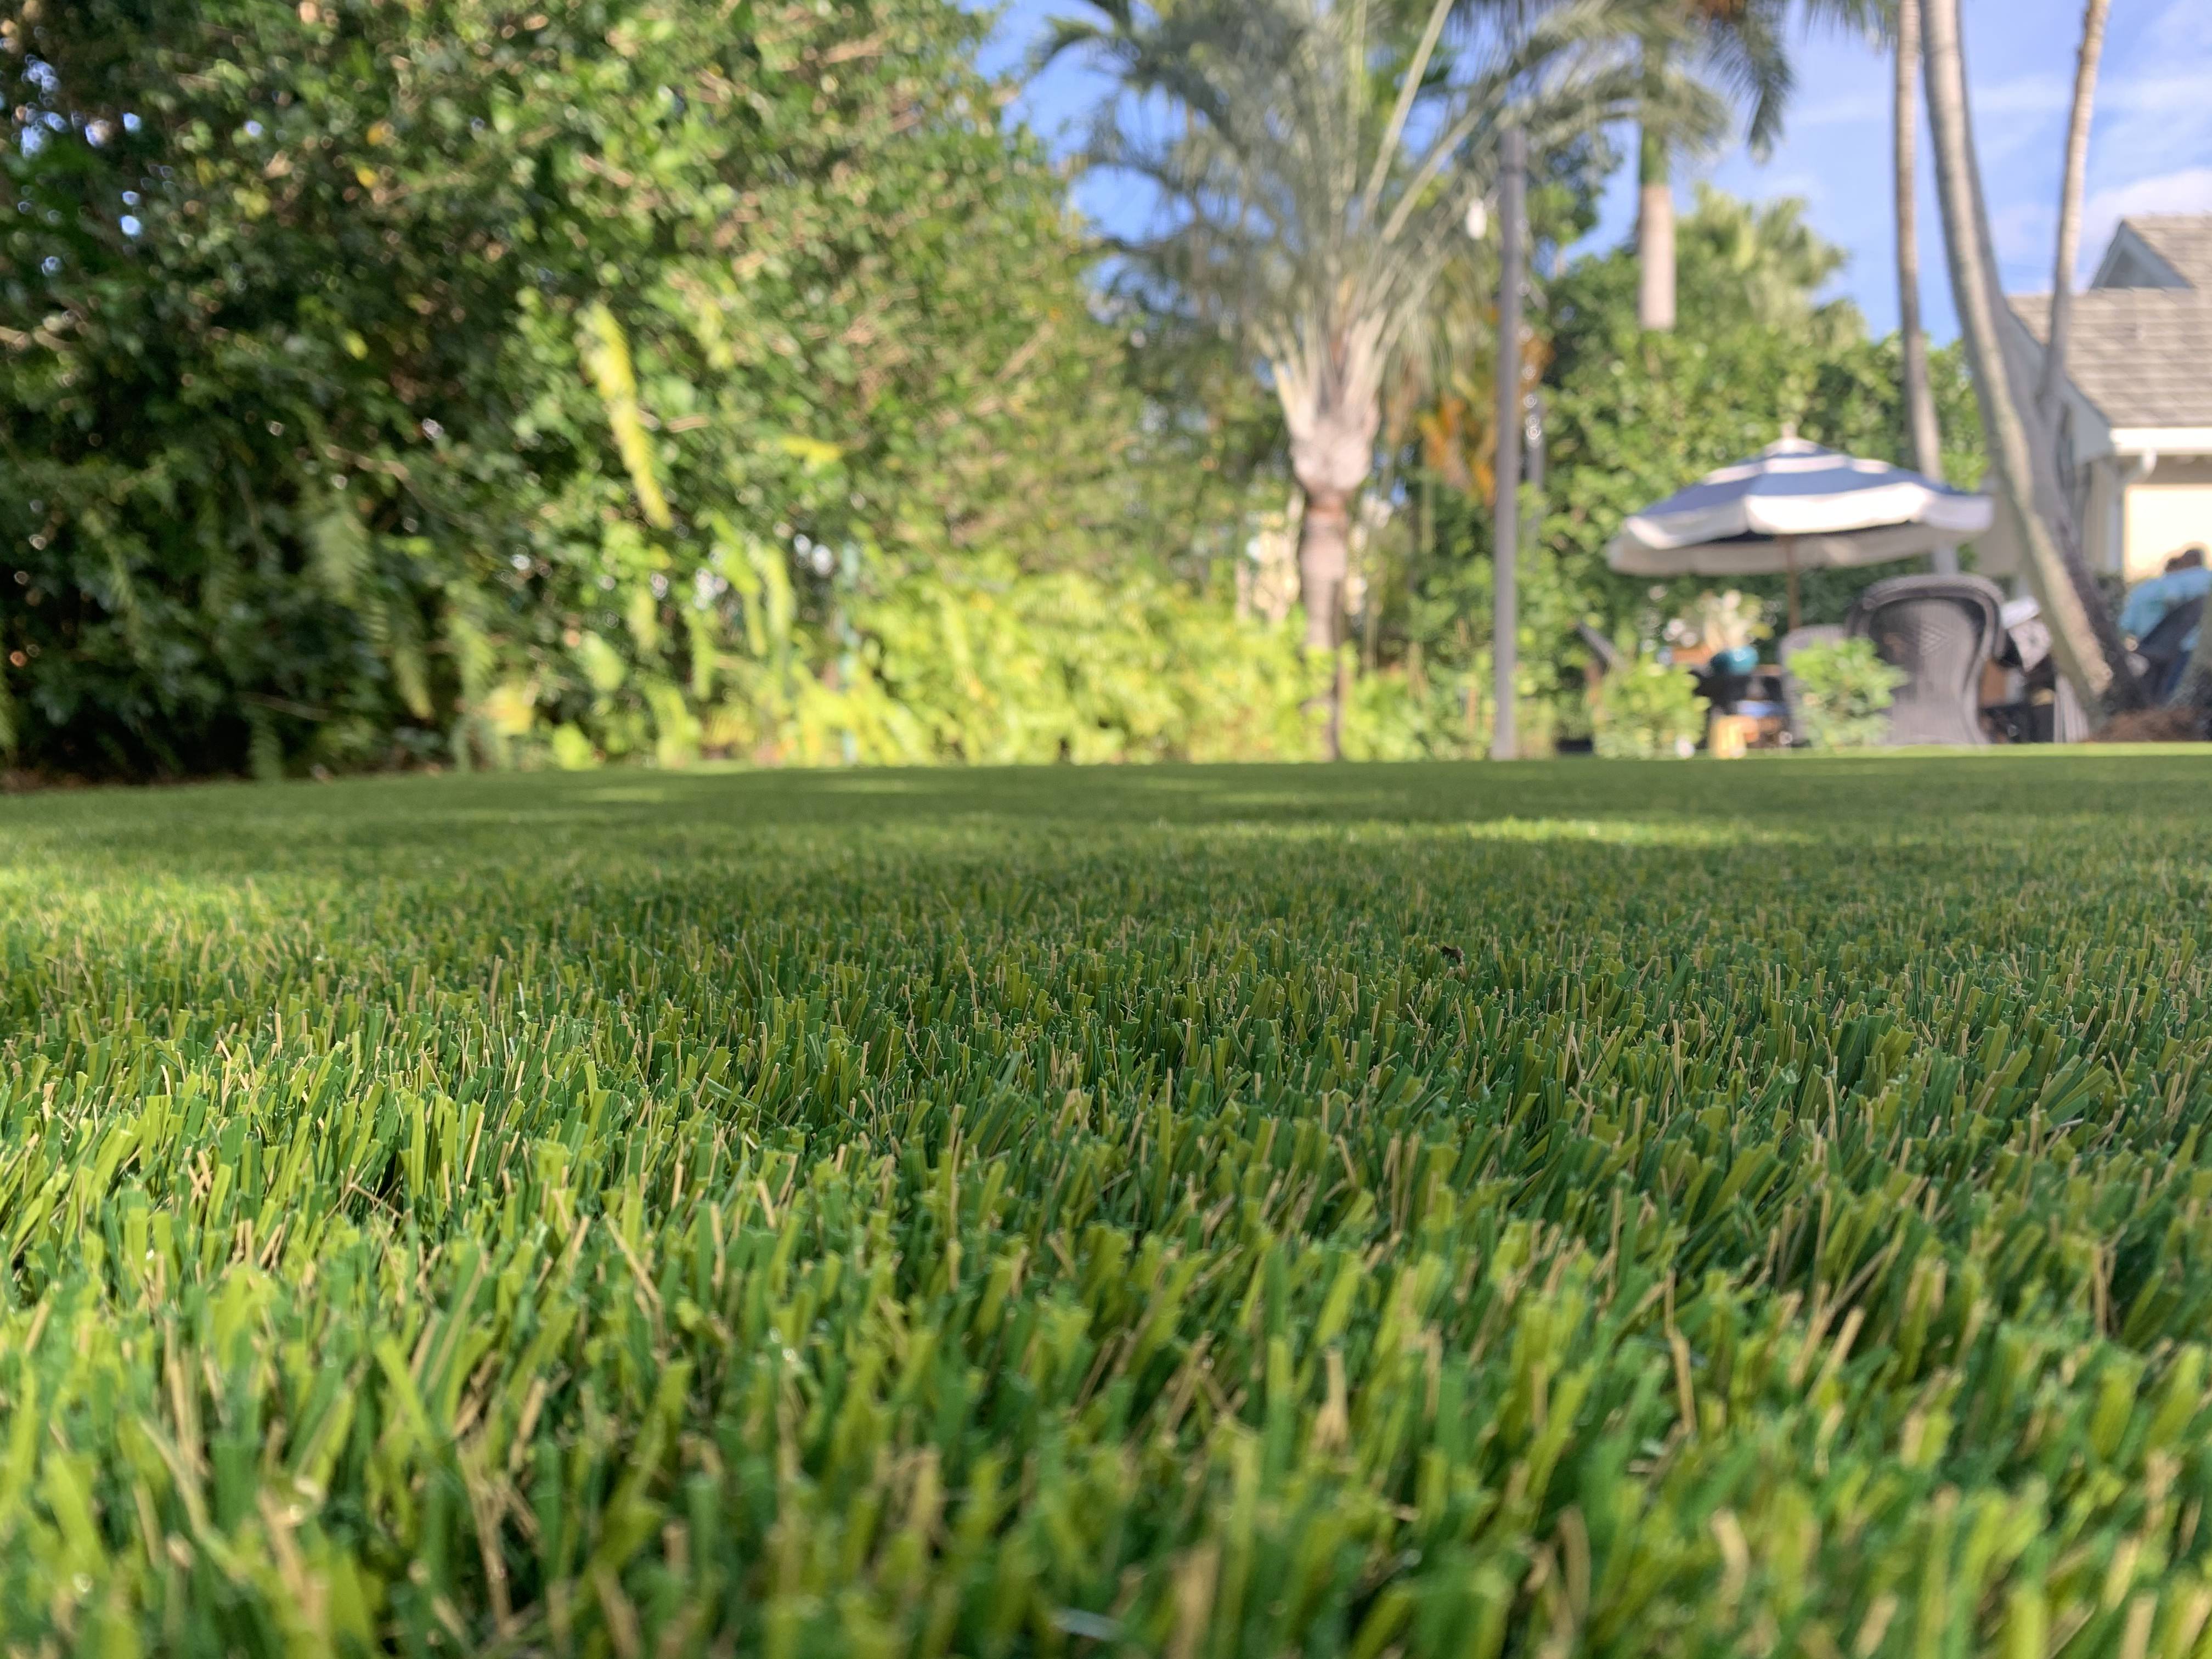 The 7 Best Artificial Grass Options in 2022 - Flooring Inc